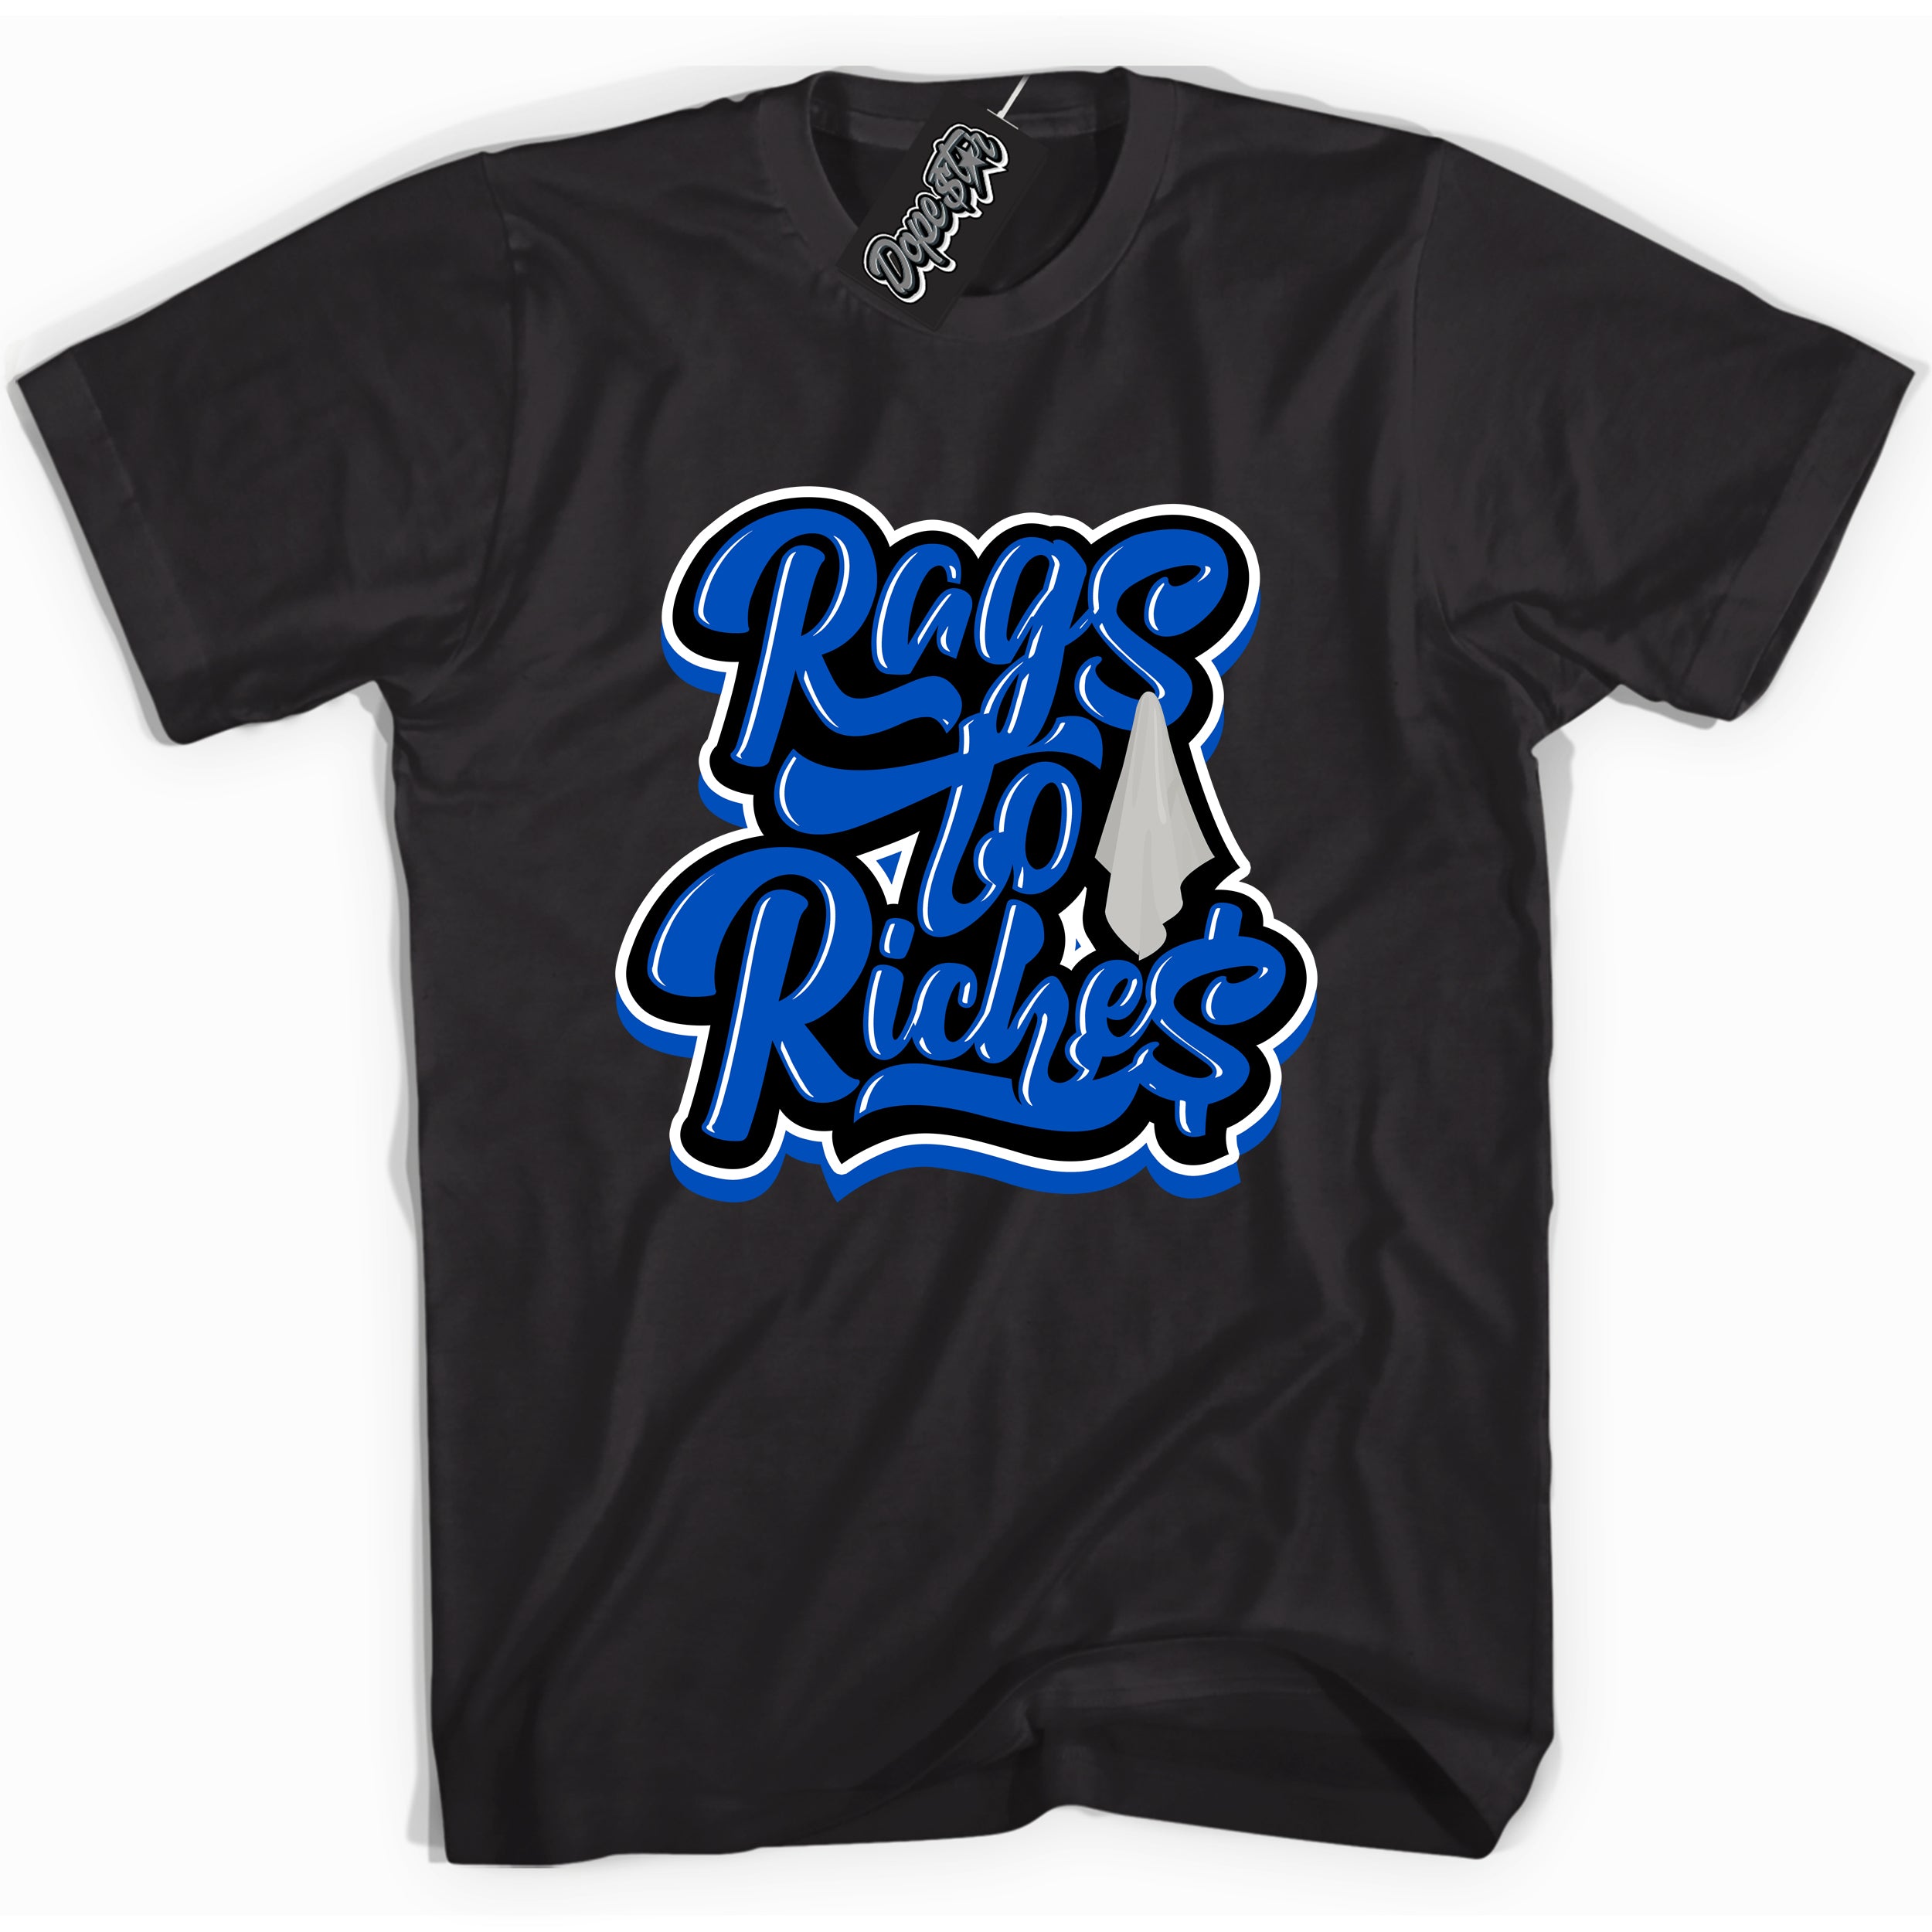 Cool Black graphic tee with Rags To Riches print, that perfectly matches OG Royal Reimagined 1s sneakers 